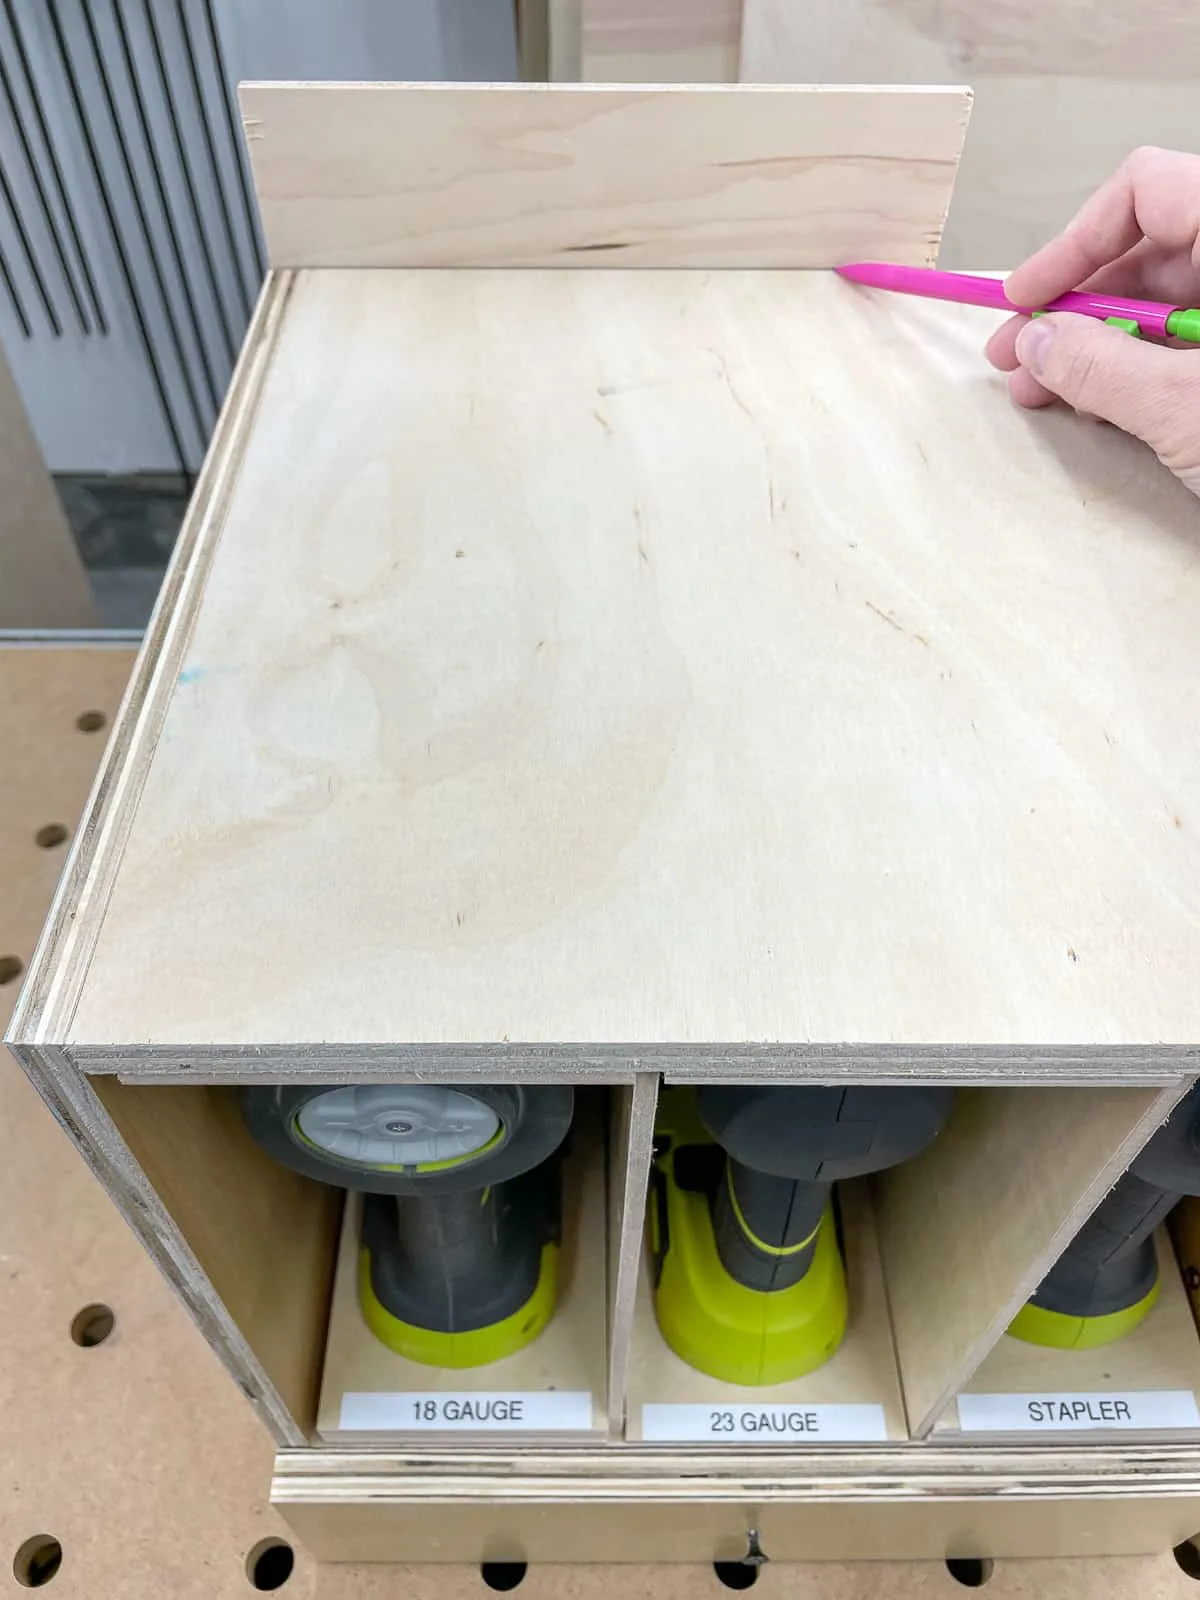 marking the height of the nail gun storage box for the backing